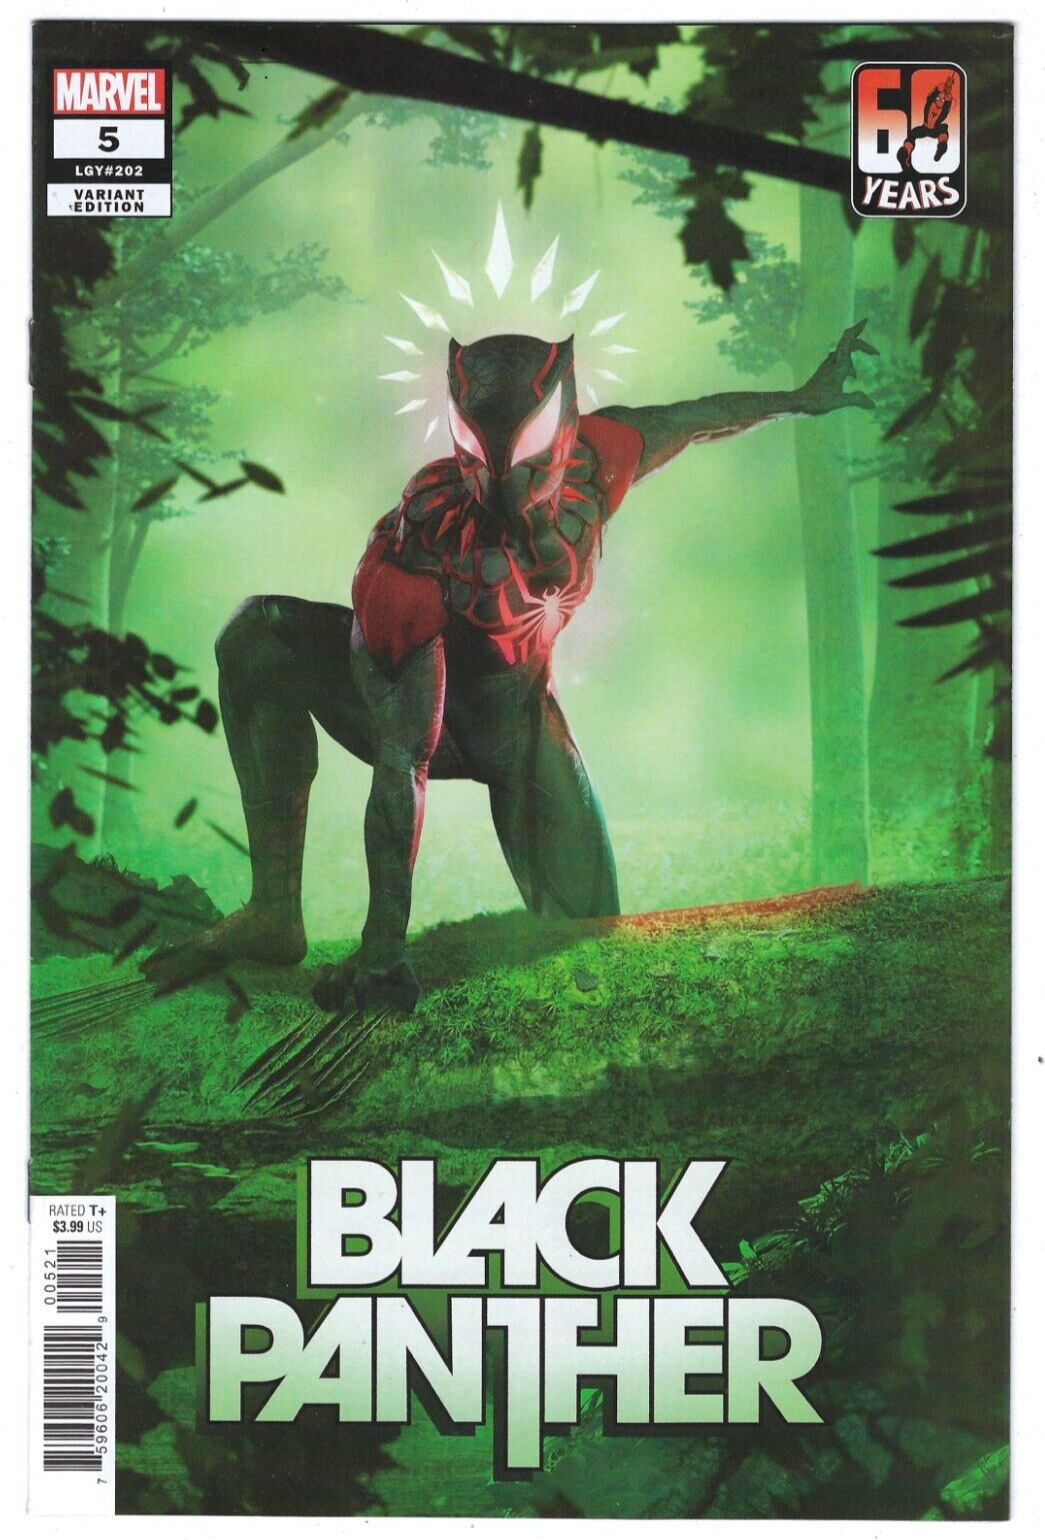 Marvel Comics BLACK PANTHER #5 first printing BossLogic cover B variant